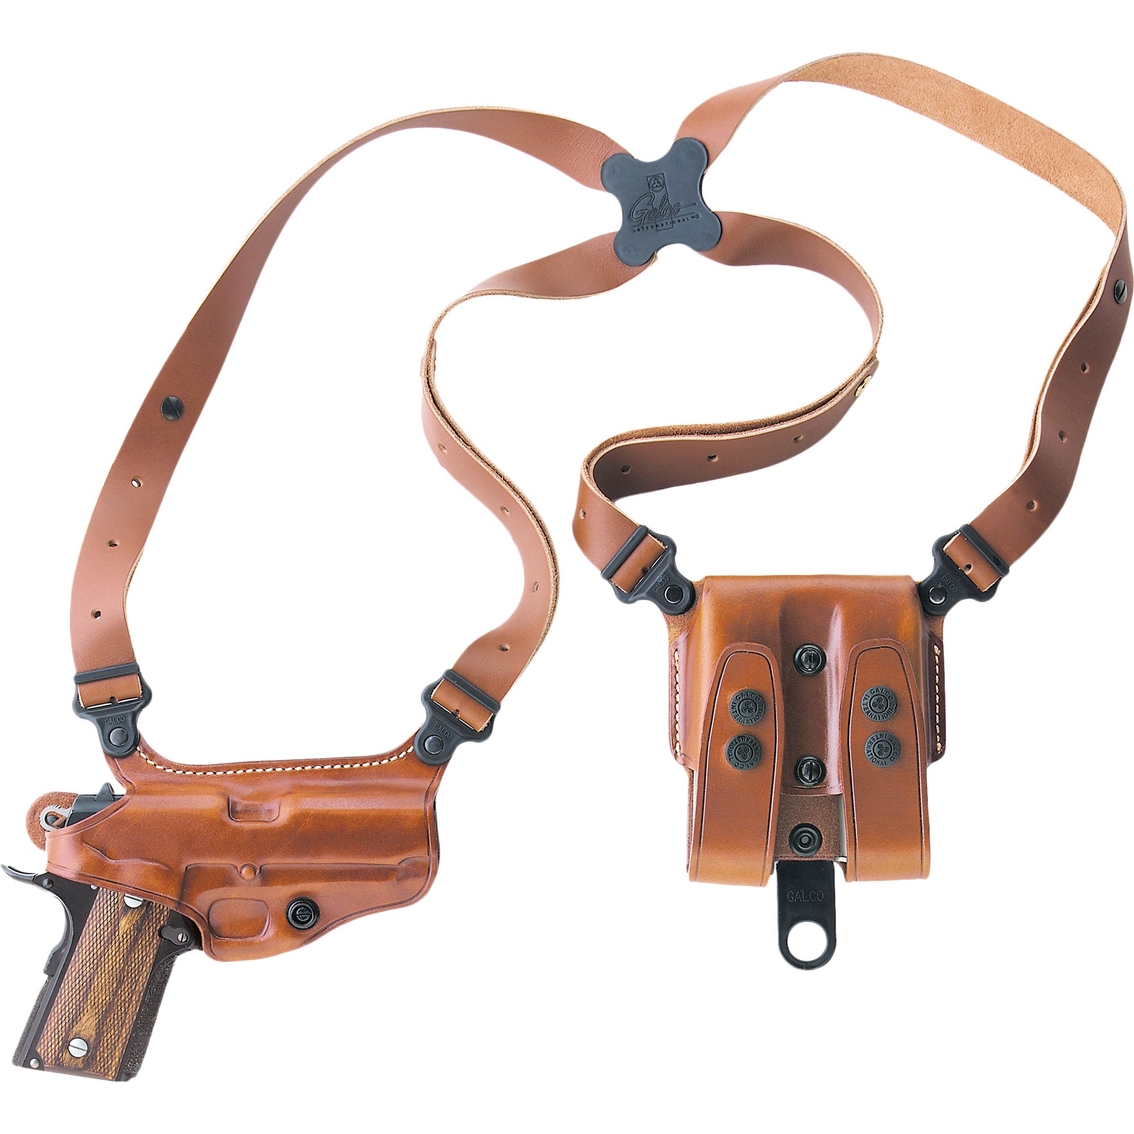 Galco MC292 Miami Classic Shoulder Holster Right Hand Tan 4 Inch HK USP for sale online 